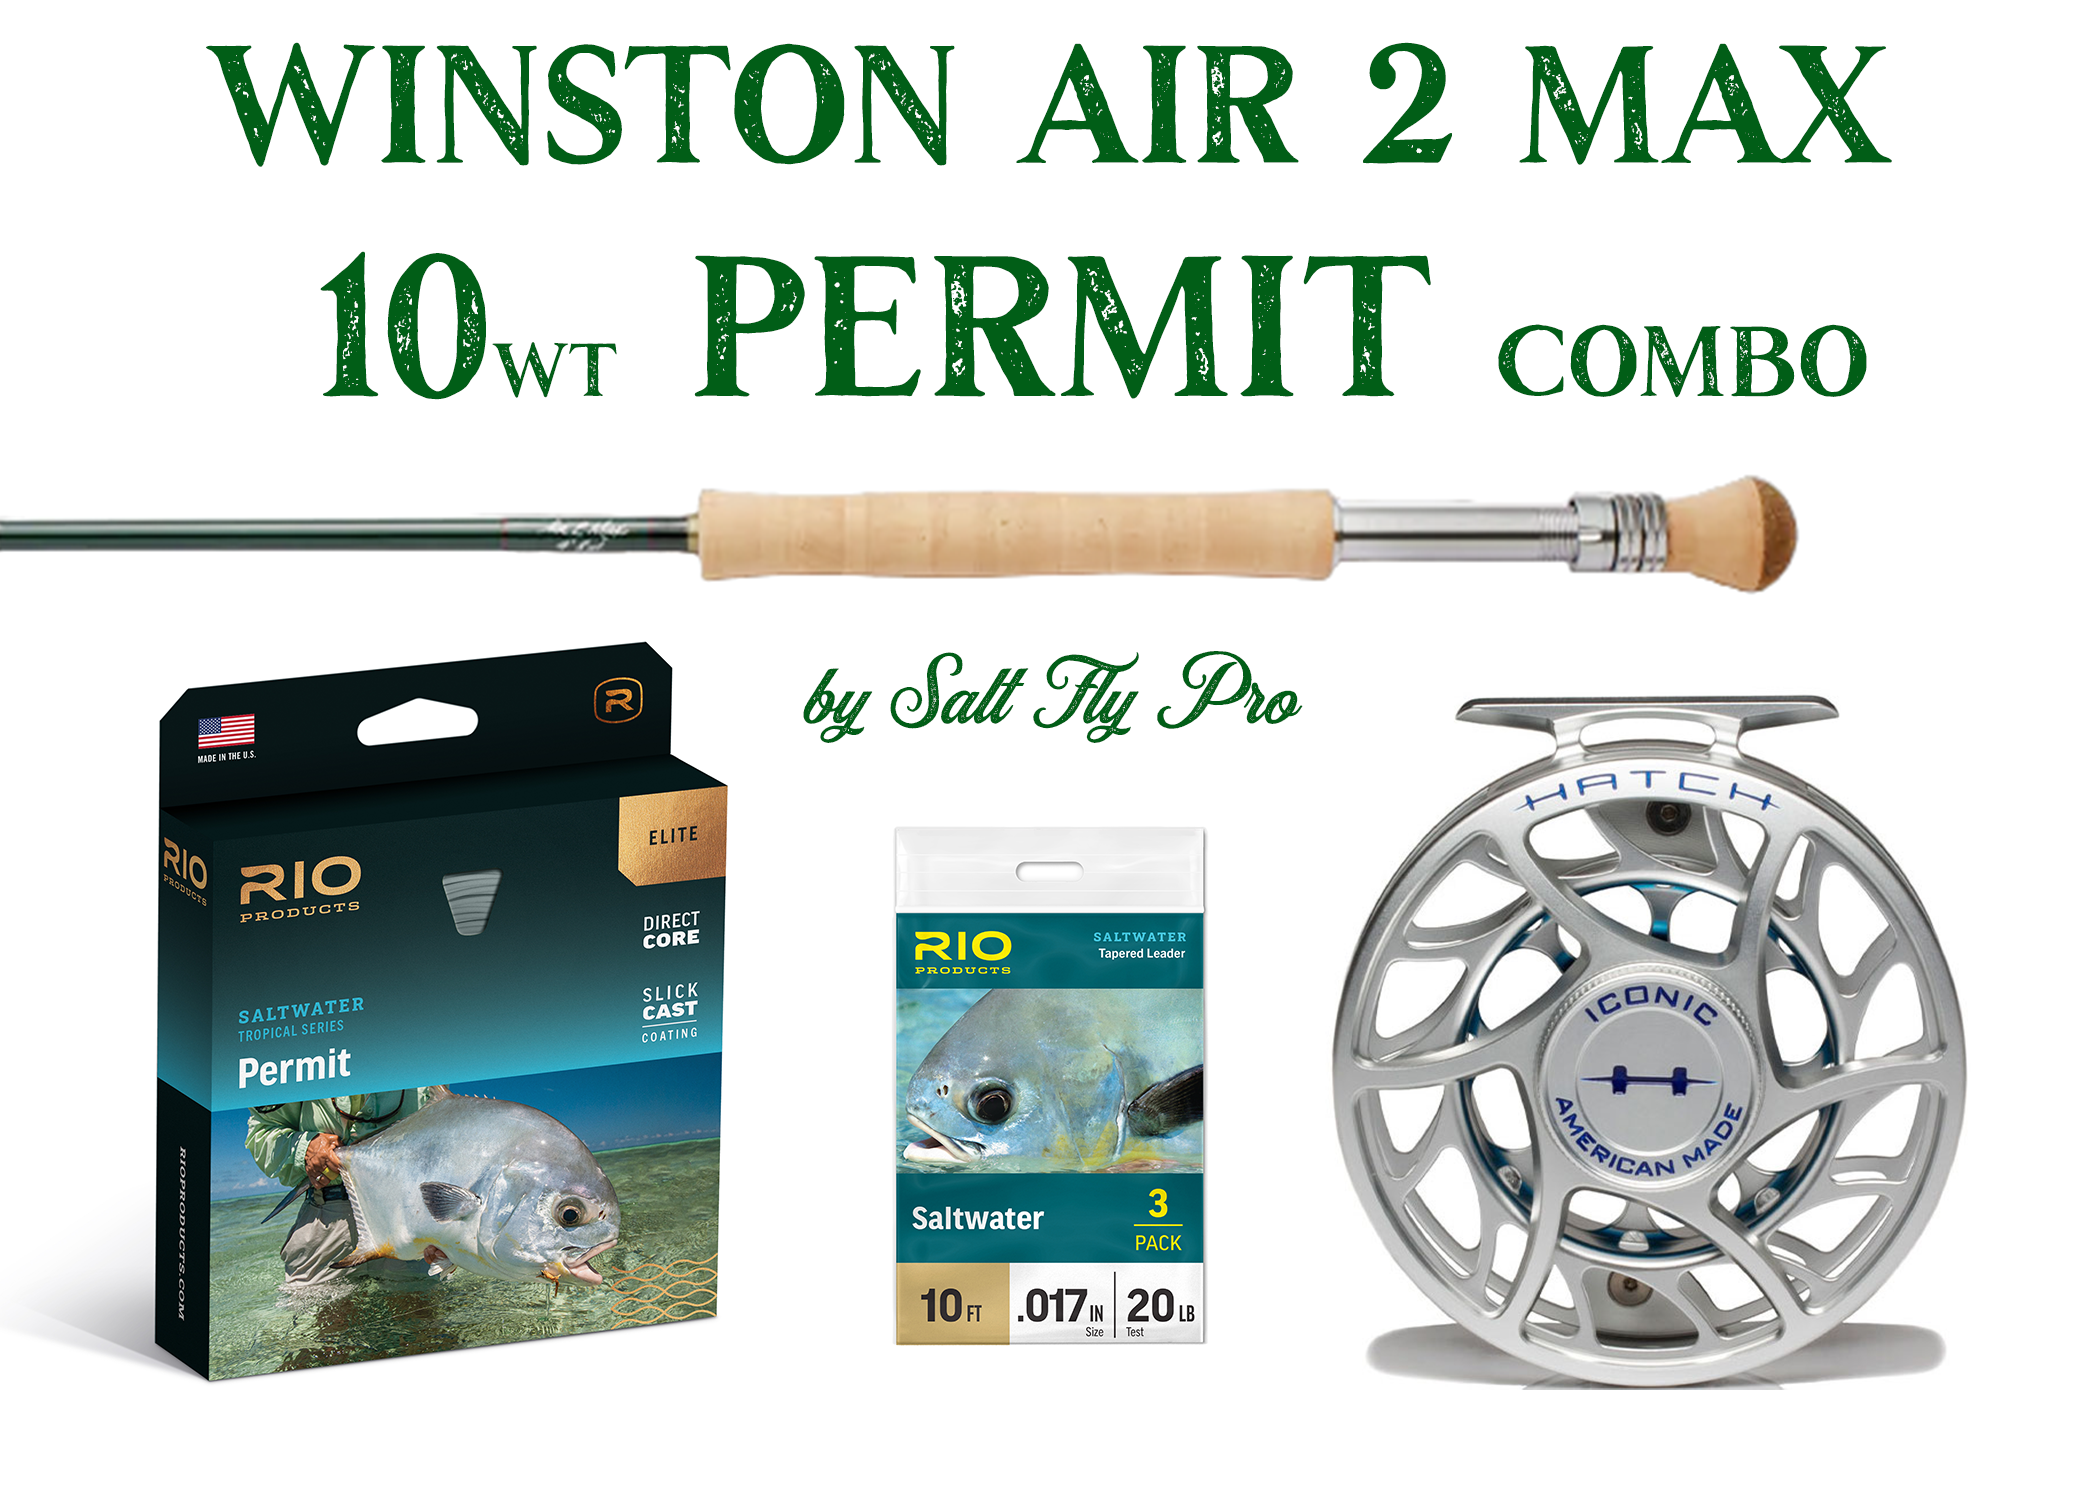 Winston Air 2 MAX 10wt Permit Fly Rod Combo Saltwater NEW